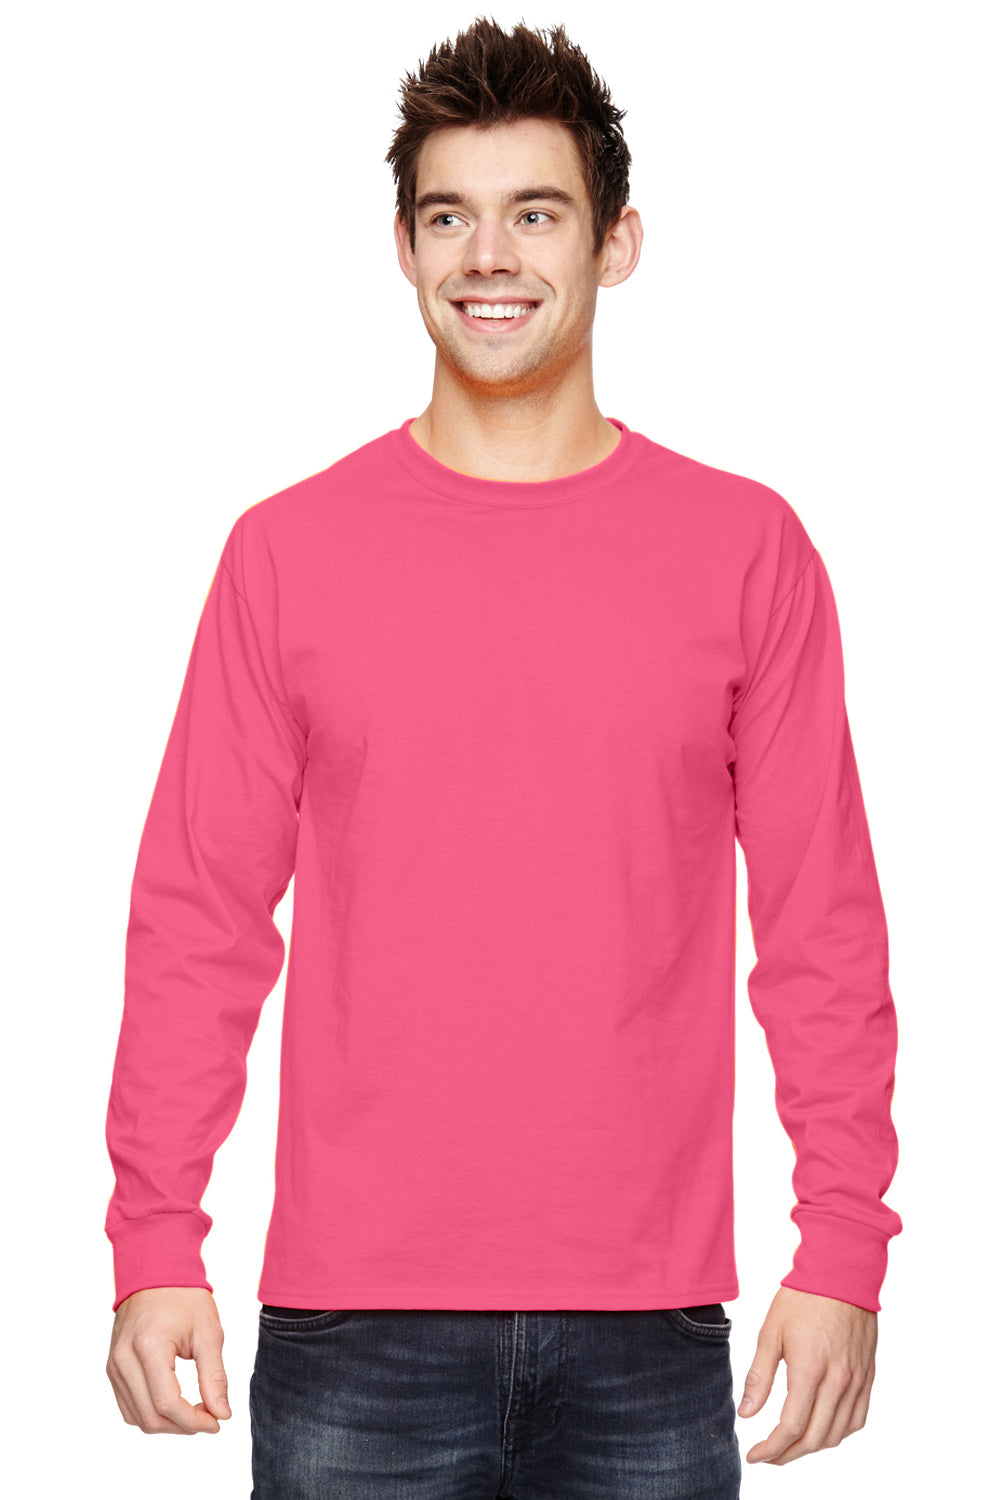 Fruit Of The Loom 4930 Mens HD Jersey Long Sleeve Crewneck T-Shirt Neon Pink Front